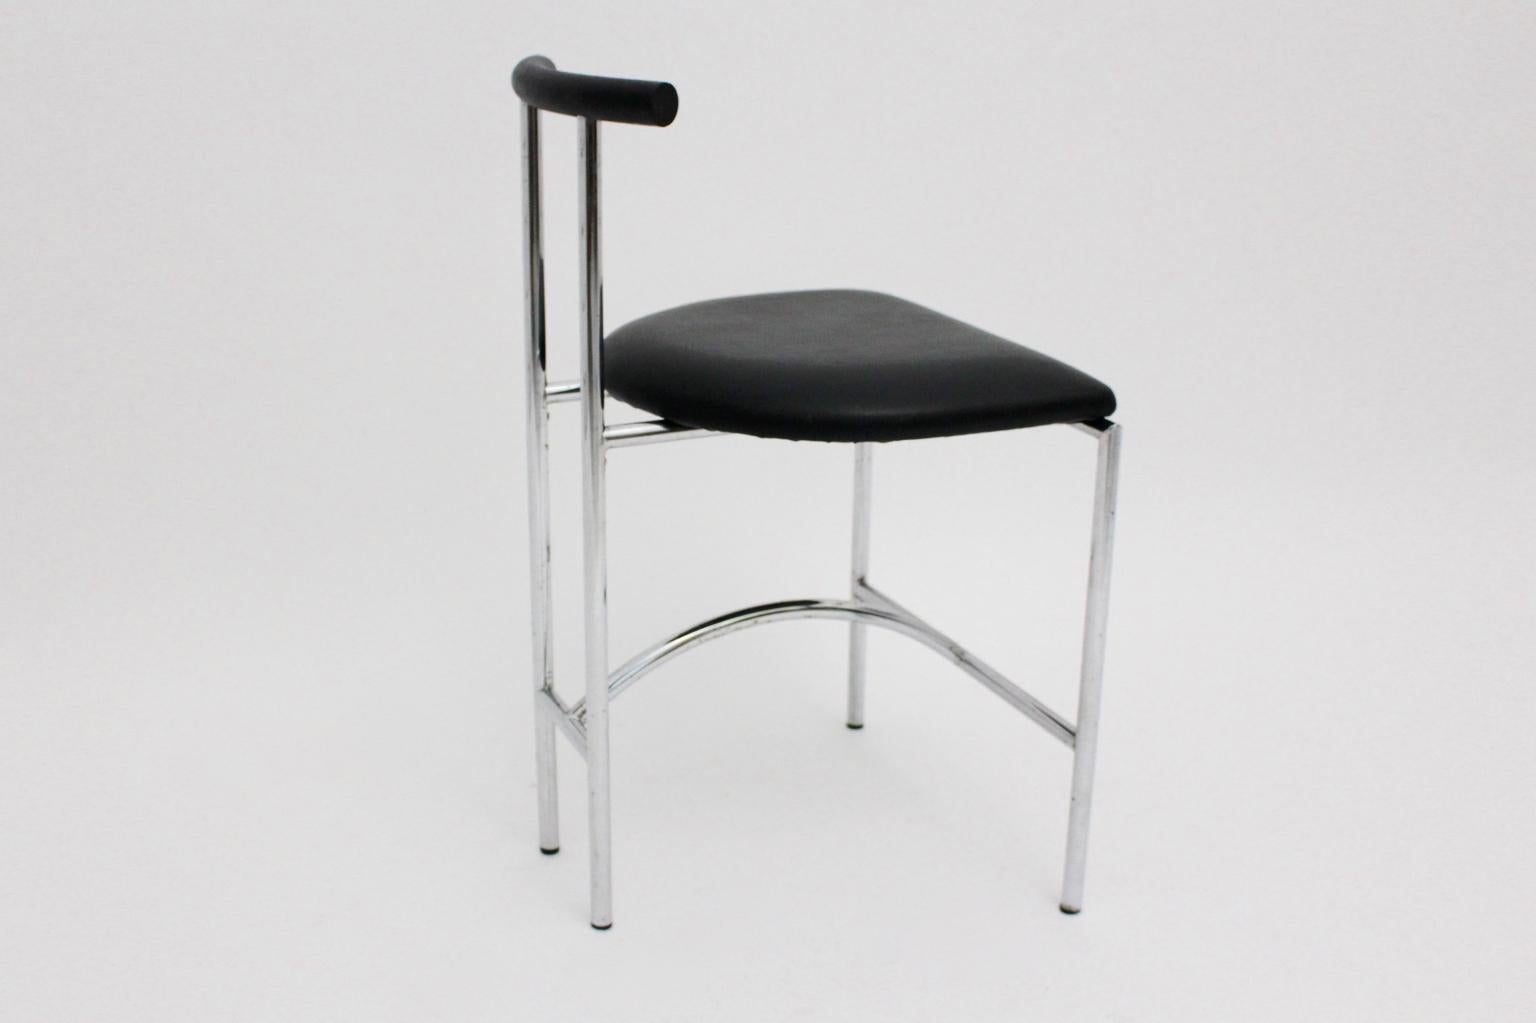 Late 20th Century Black Modern Vintage Side Chair Tokyo by Rodney Kinsman 1985 Metal Faux Leather For Sale